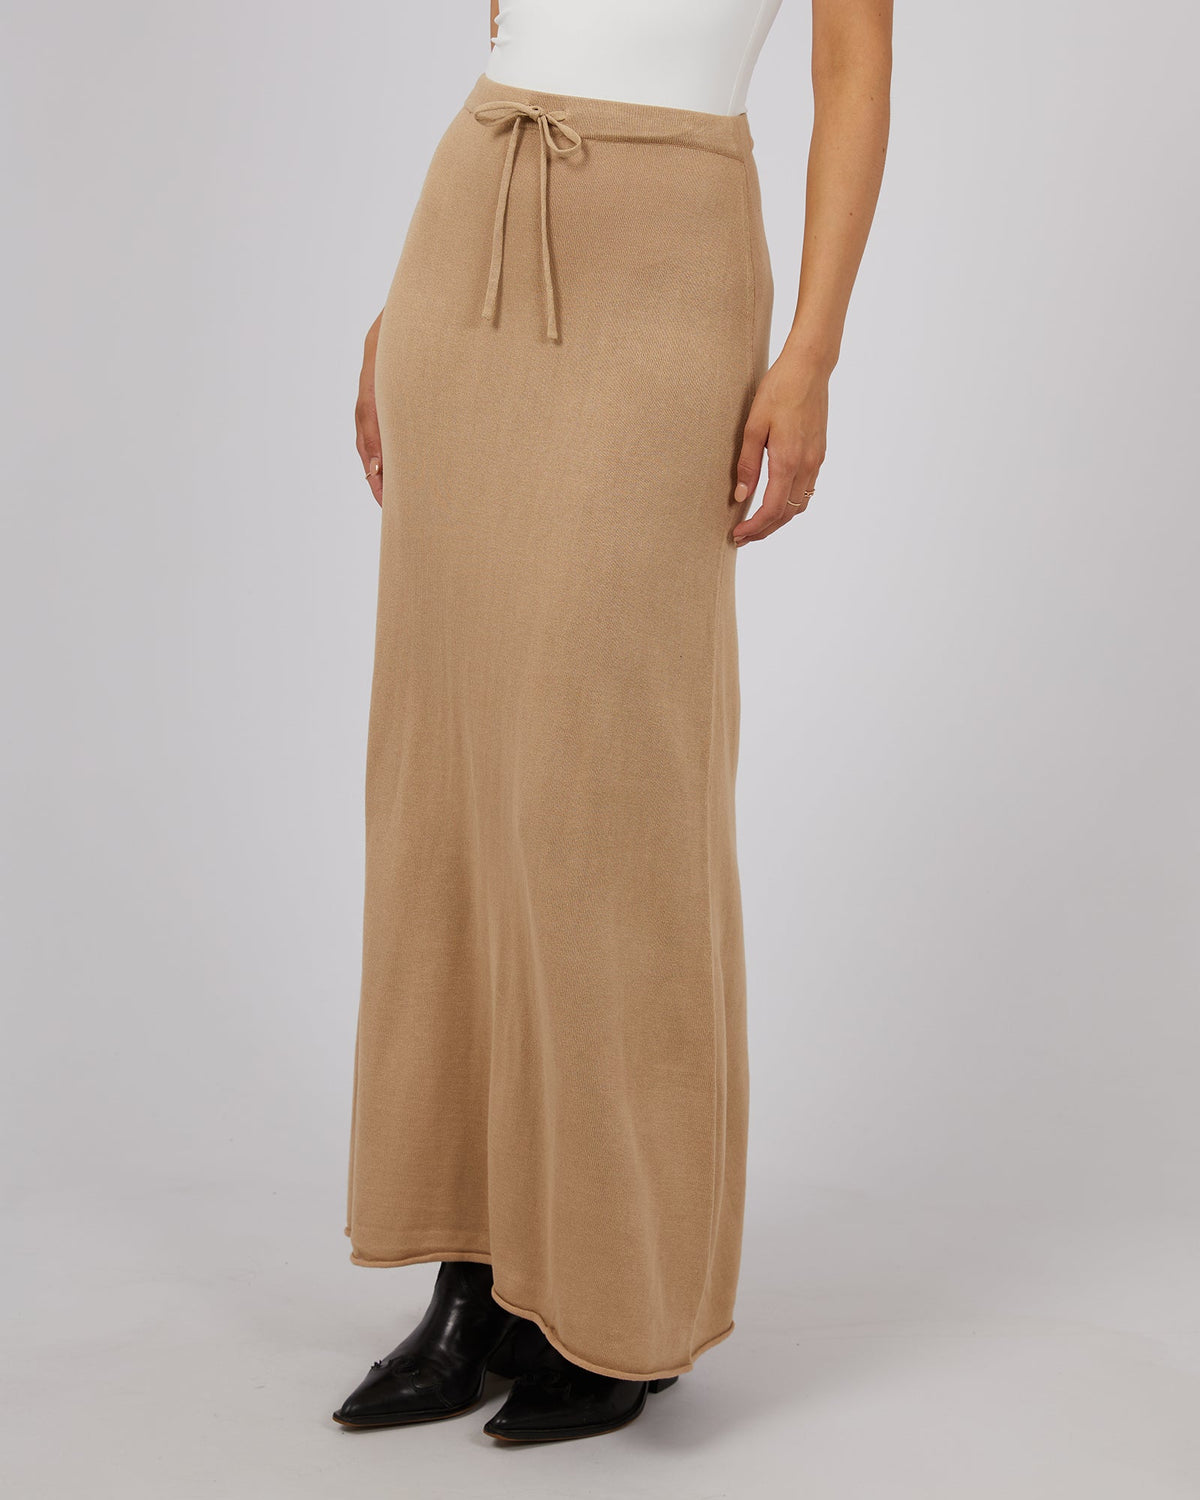 All About Eve-Eve Knit Skirt Oatmeal-Edge Clothing